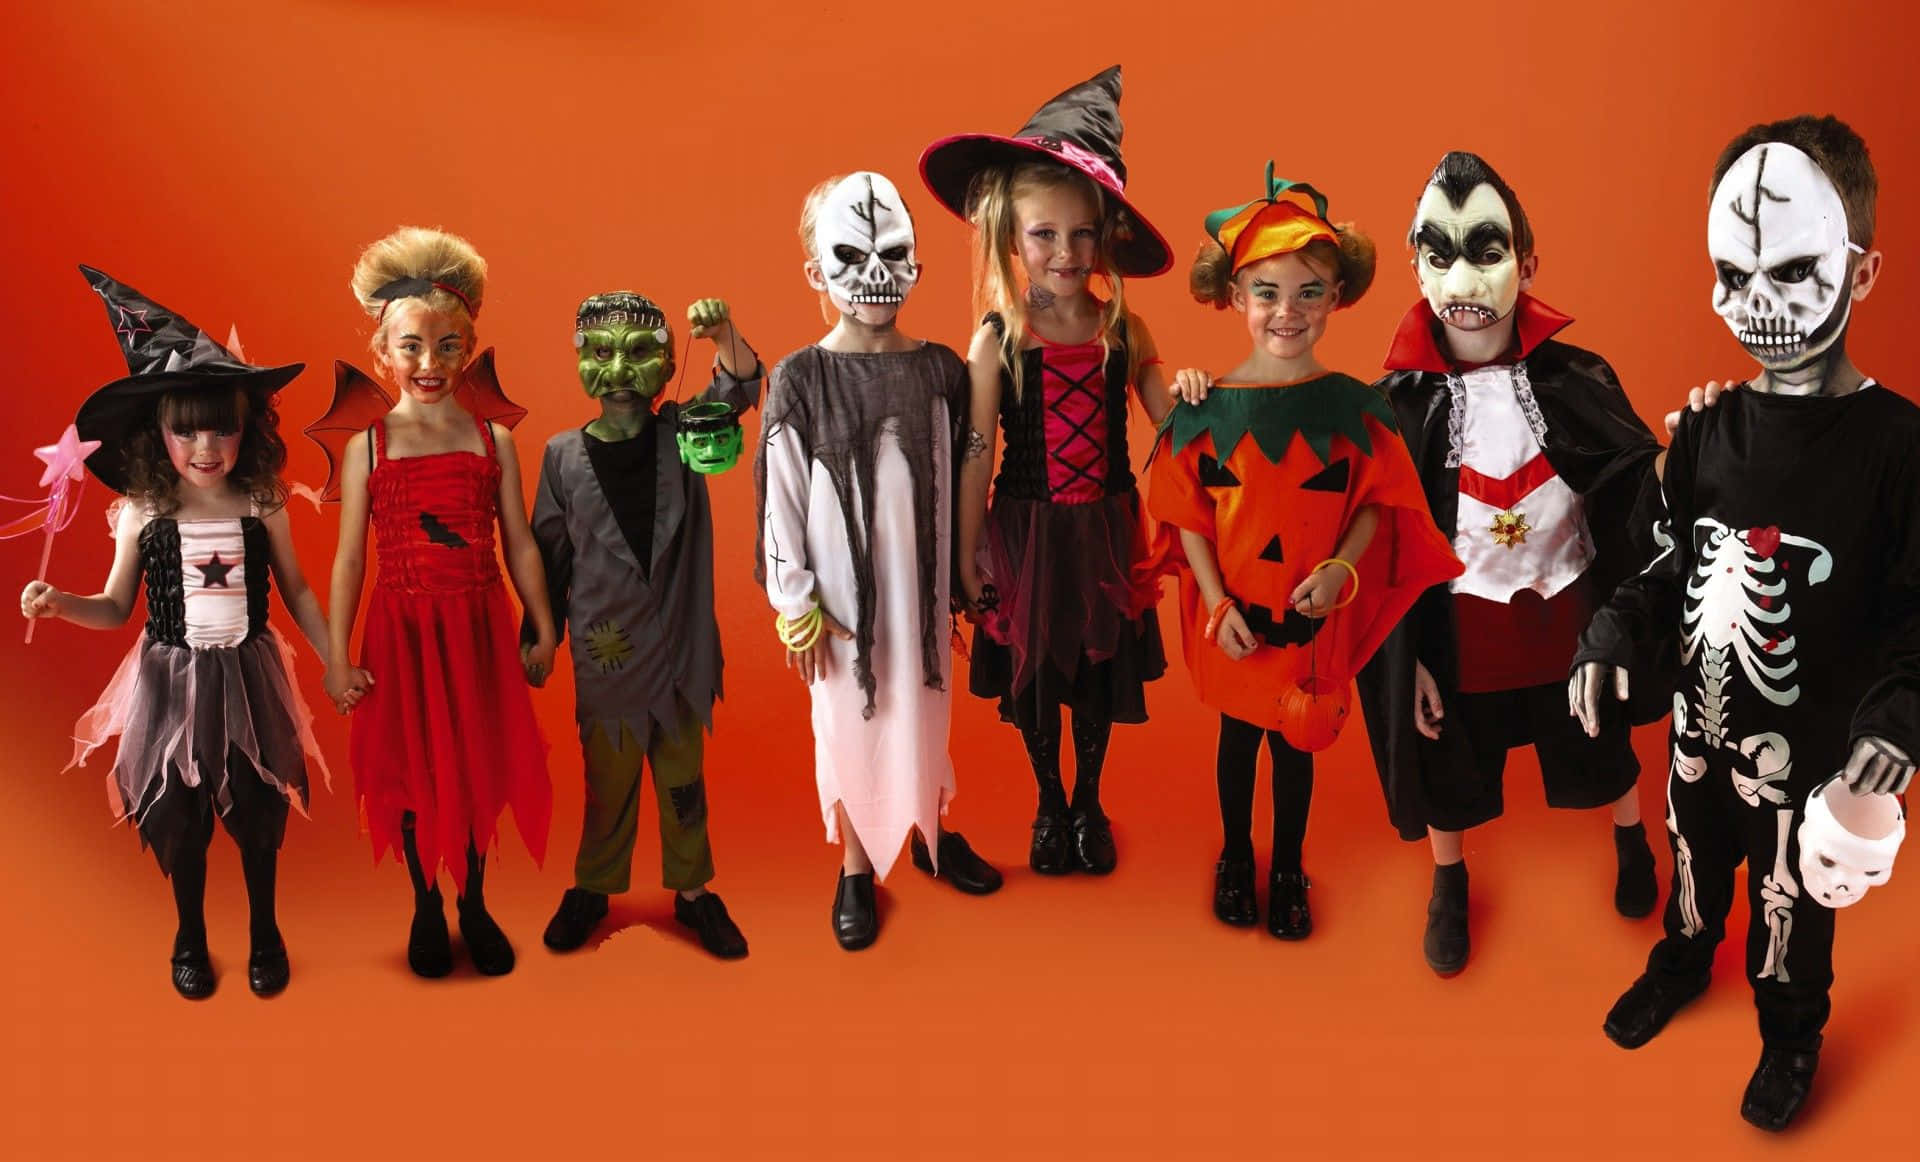 Dress up for the spookiest day of the year!